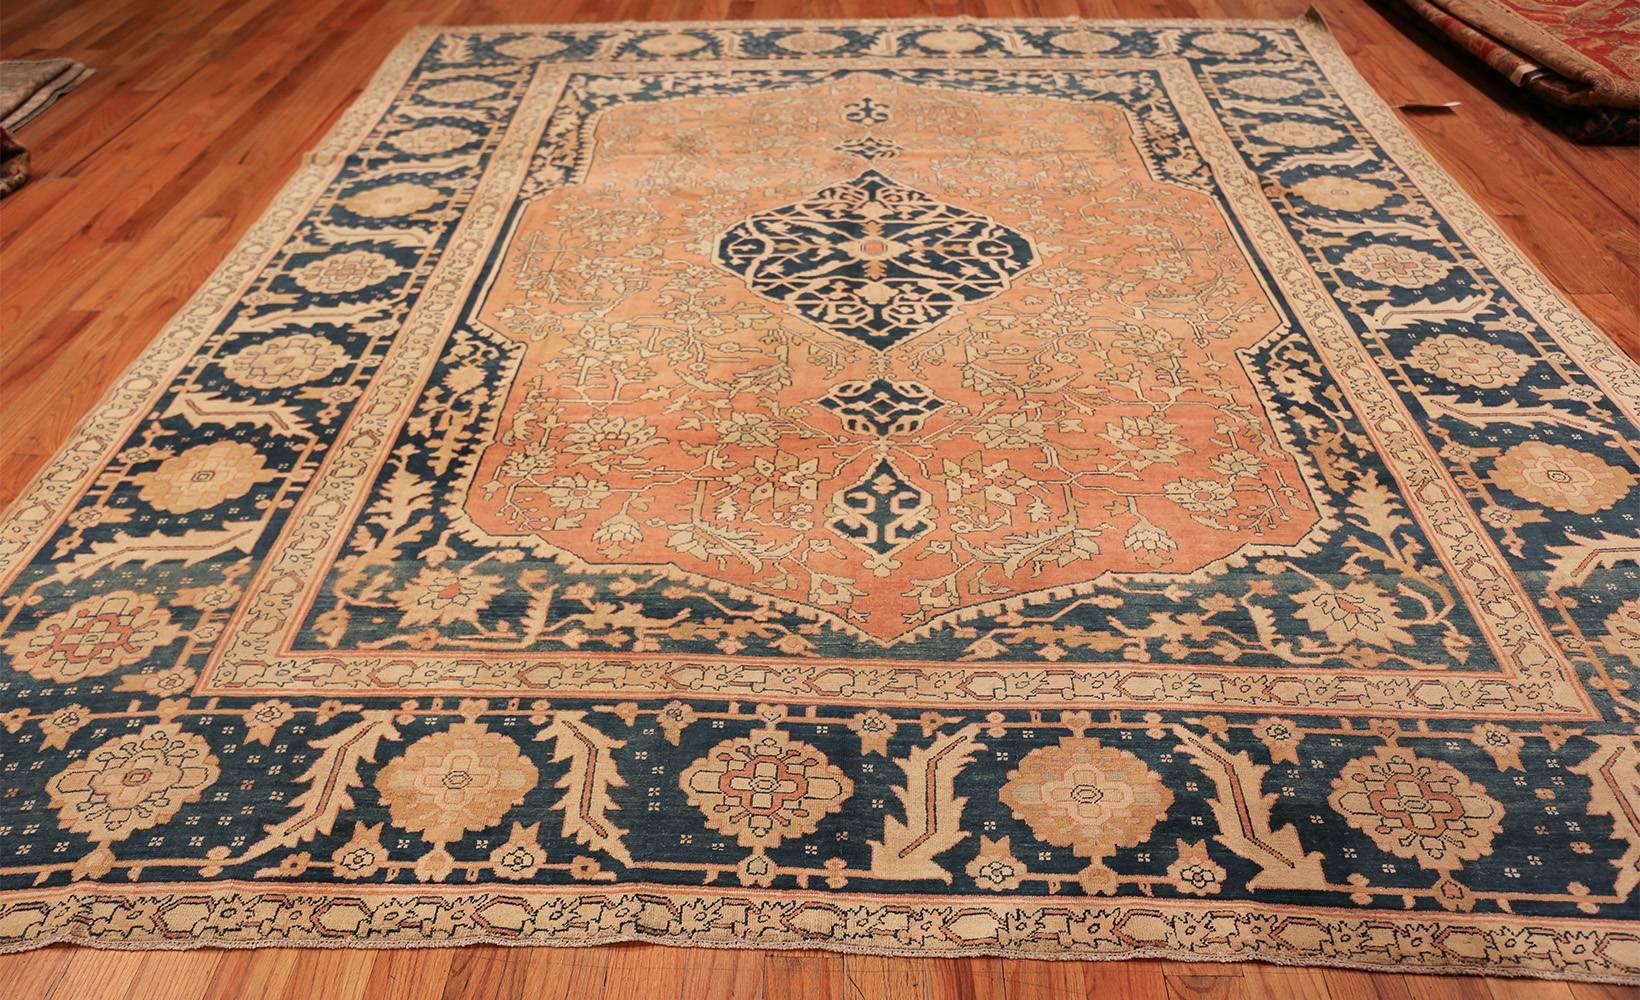 Antique Serapi carpet, origin Persia, circa 1900. Like most Serapi carpets, this piece uses an elegantly understated degree of color to allow the craftsmanship in the shapes to shine through. Bright, pale gold stands out against the deep, dark